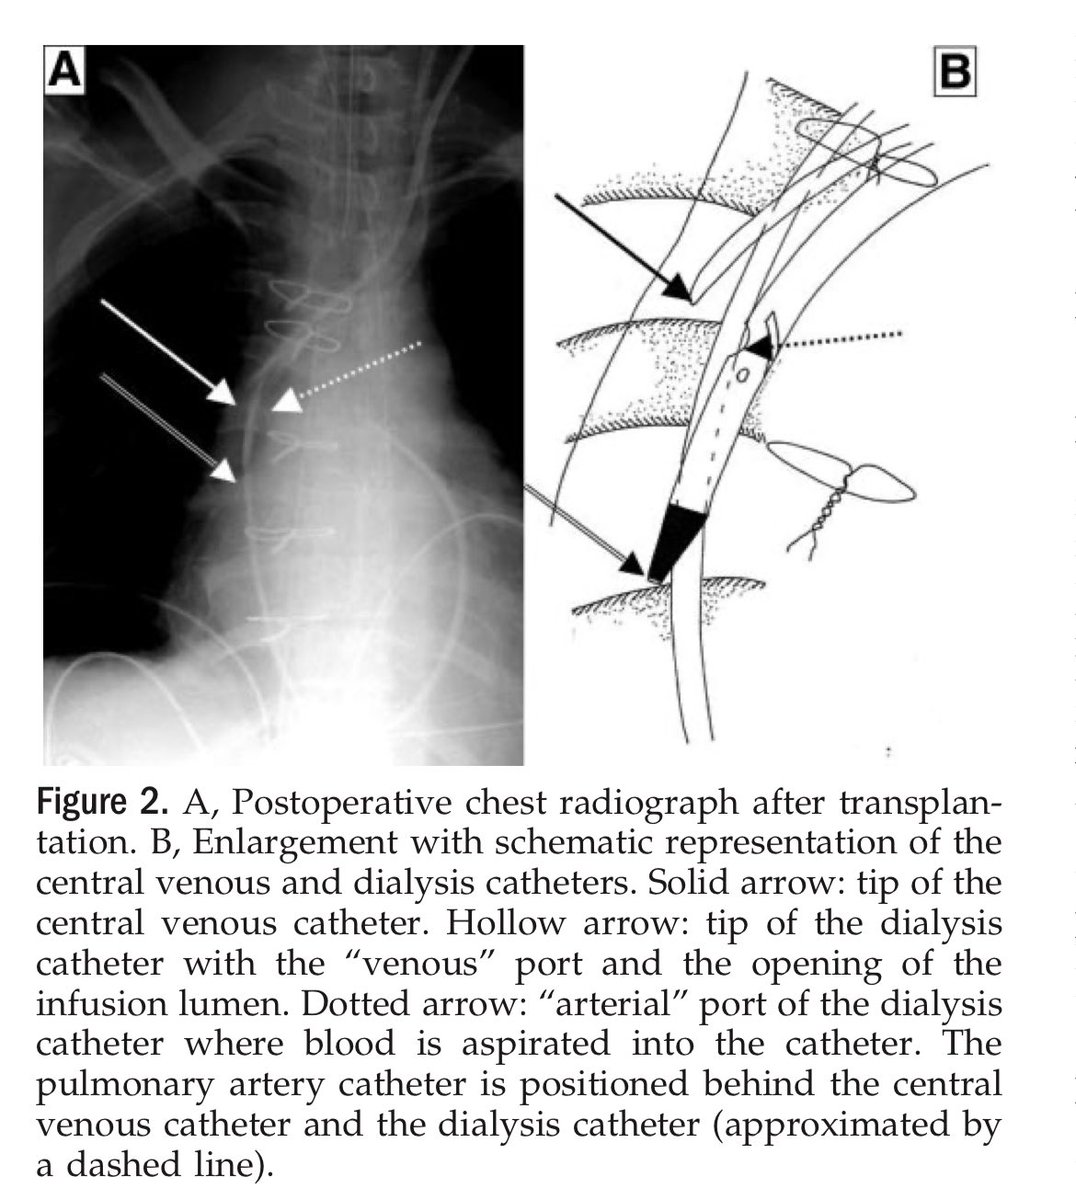 If your patients haemodynamics collapse shortly after commencing CRRT think about catheter placement

If the CVC tip is near the arterial access port of the dialysis catheter, substantial clearance of the upstream infused vasopressors can occur

1/